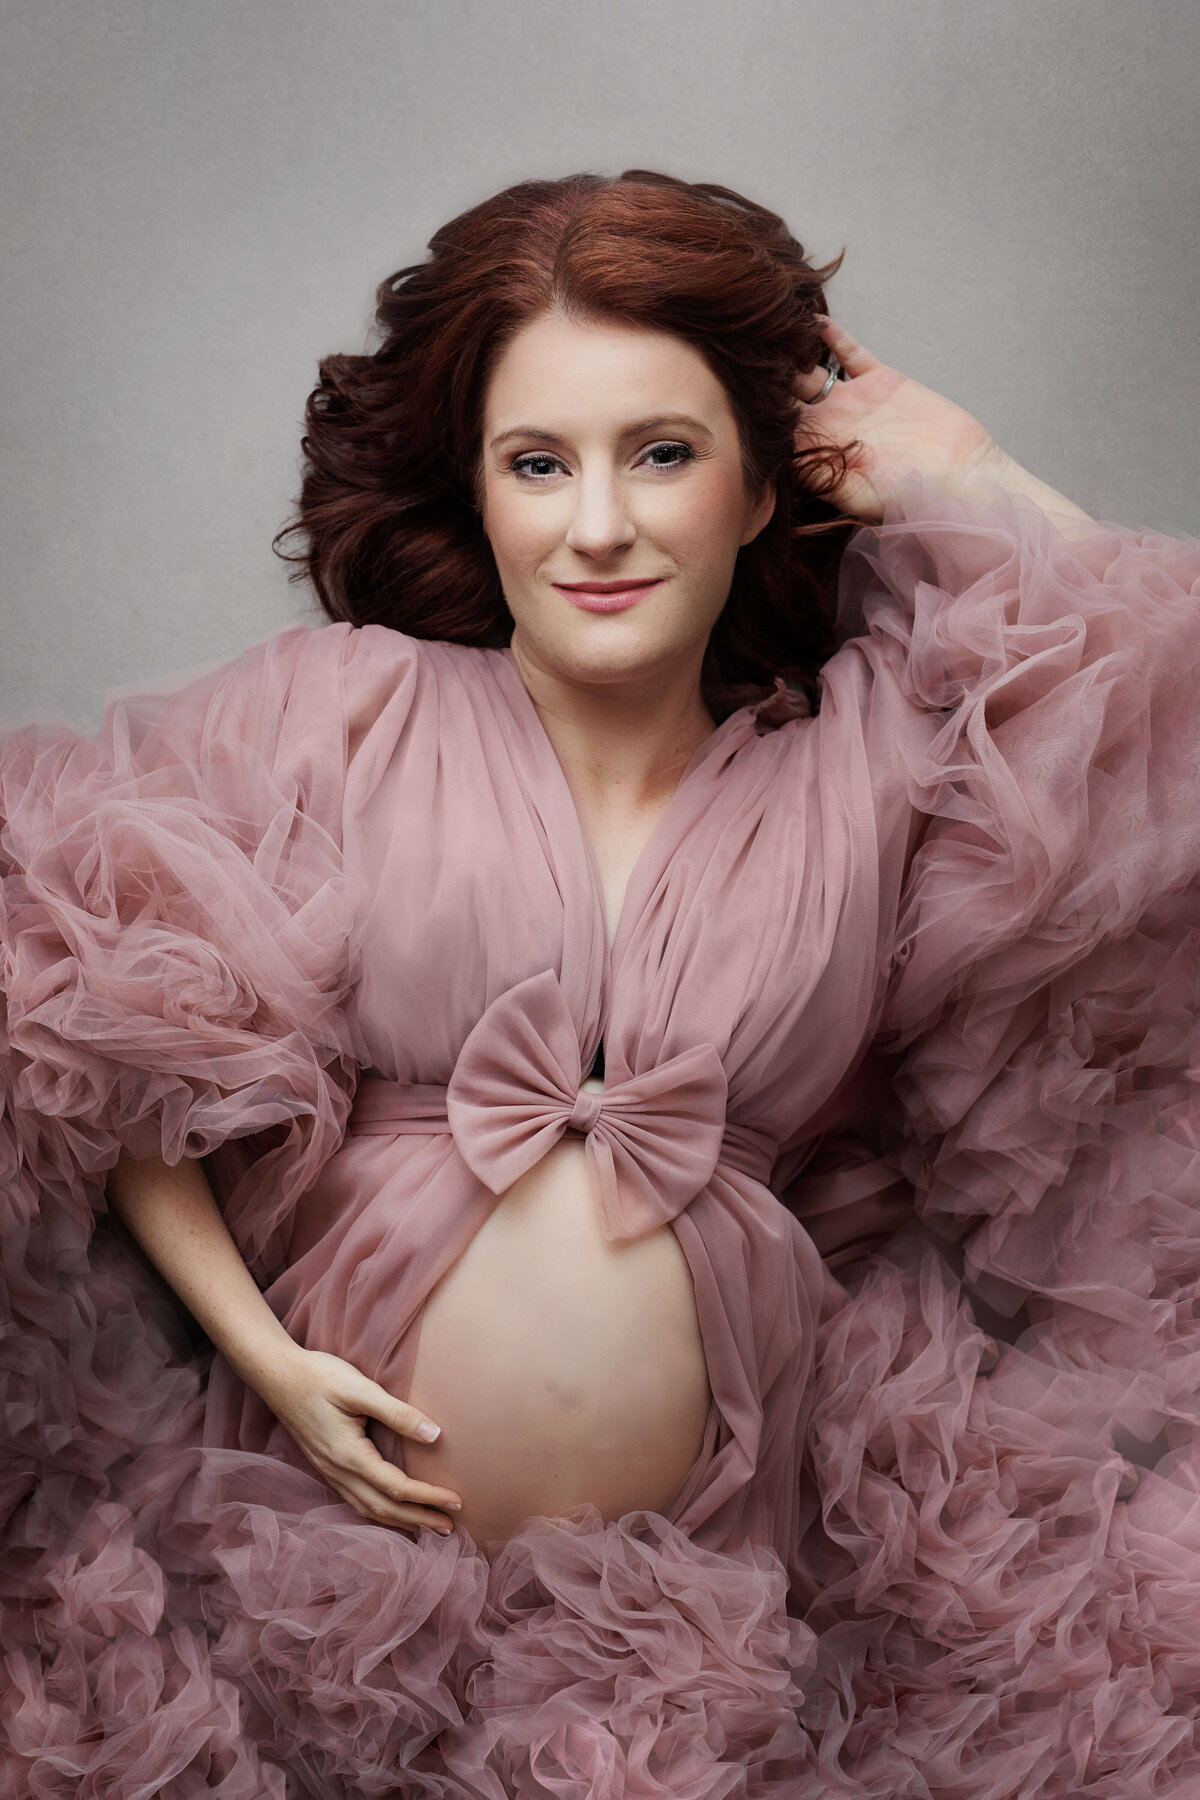 pregnant mother laying on her back with her baby bump showing wearing a fluffy maternity gown in pink at a photography studio